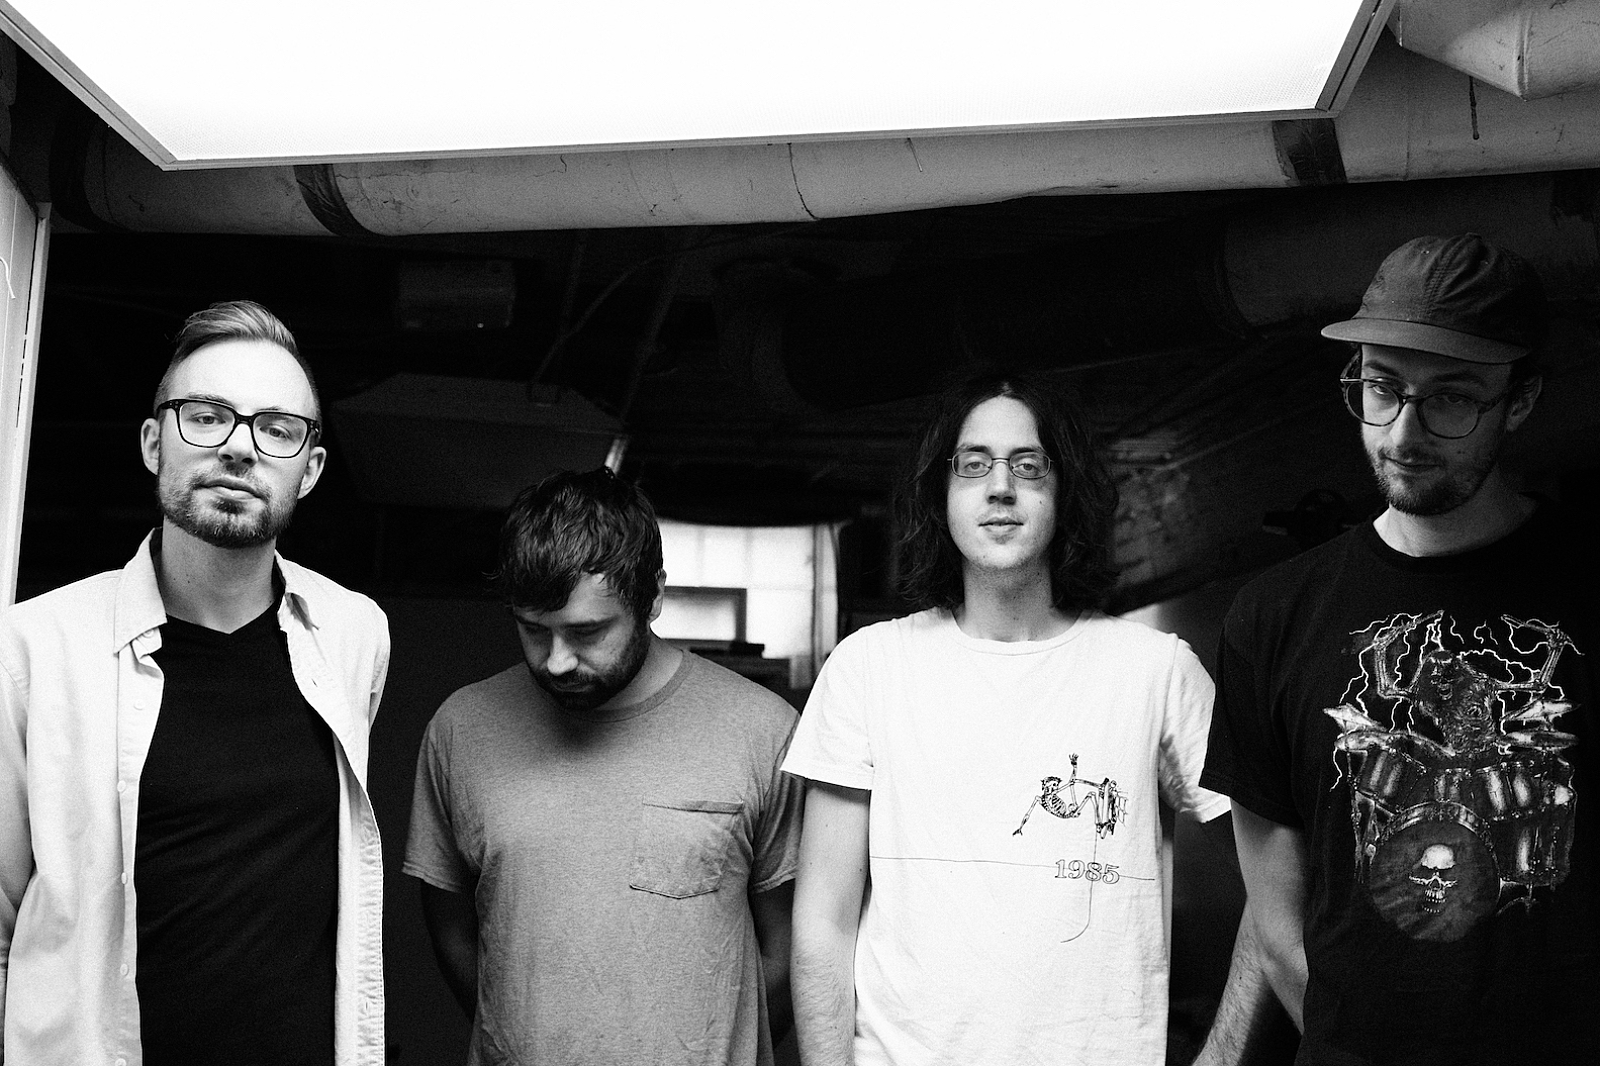 Cloud Nothings to release new album 'The Shadow I Remember'